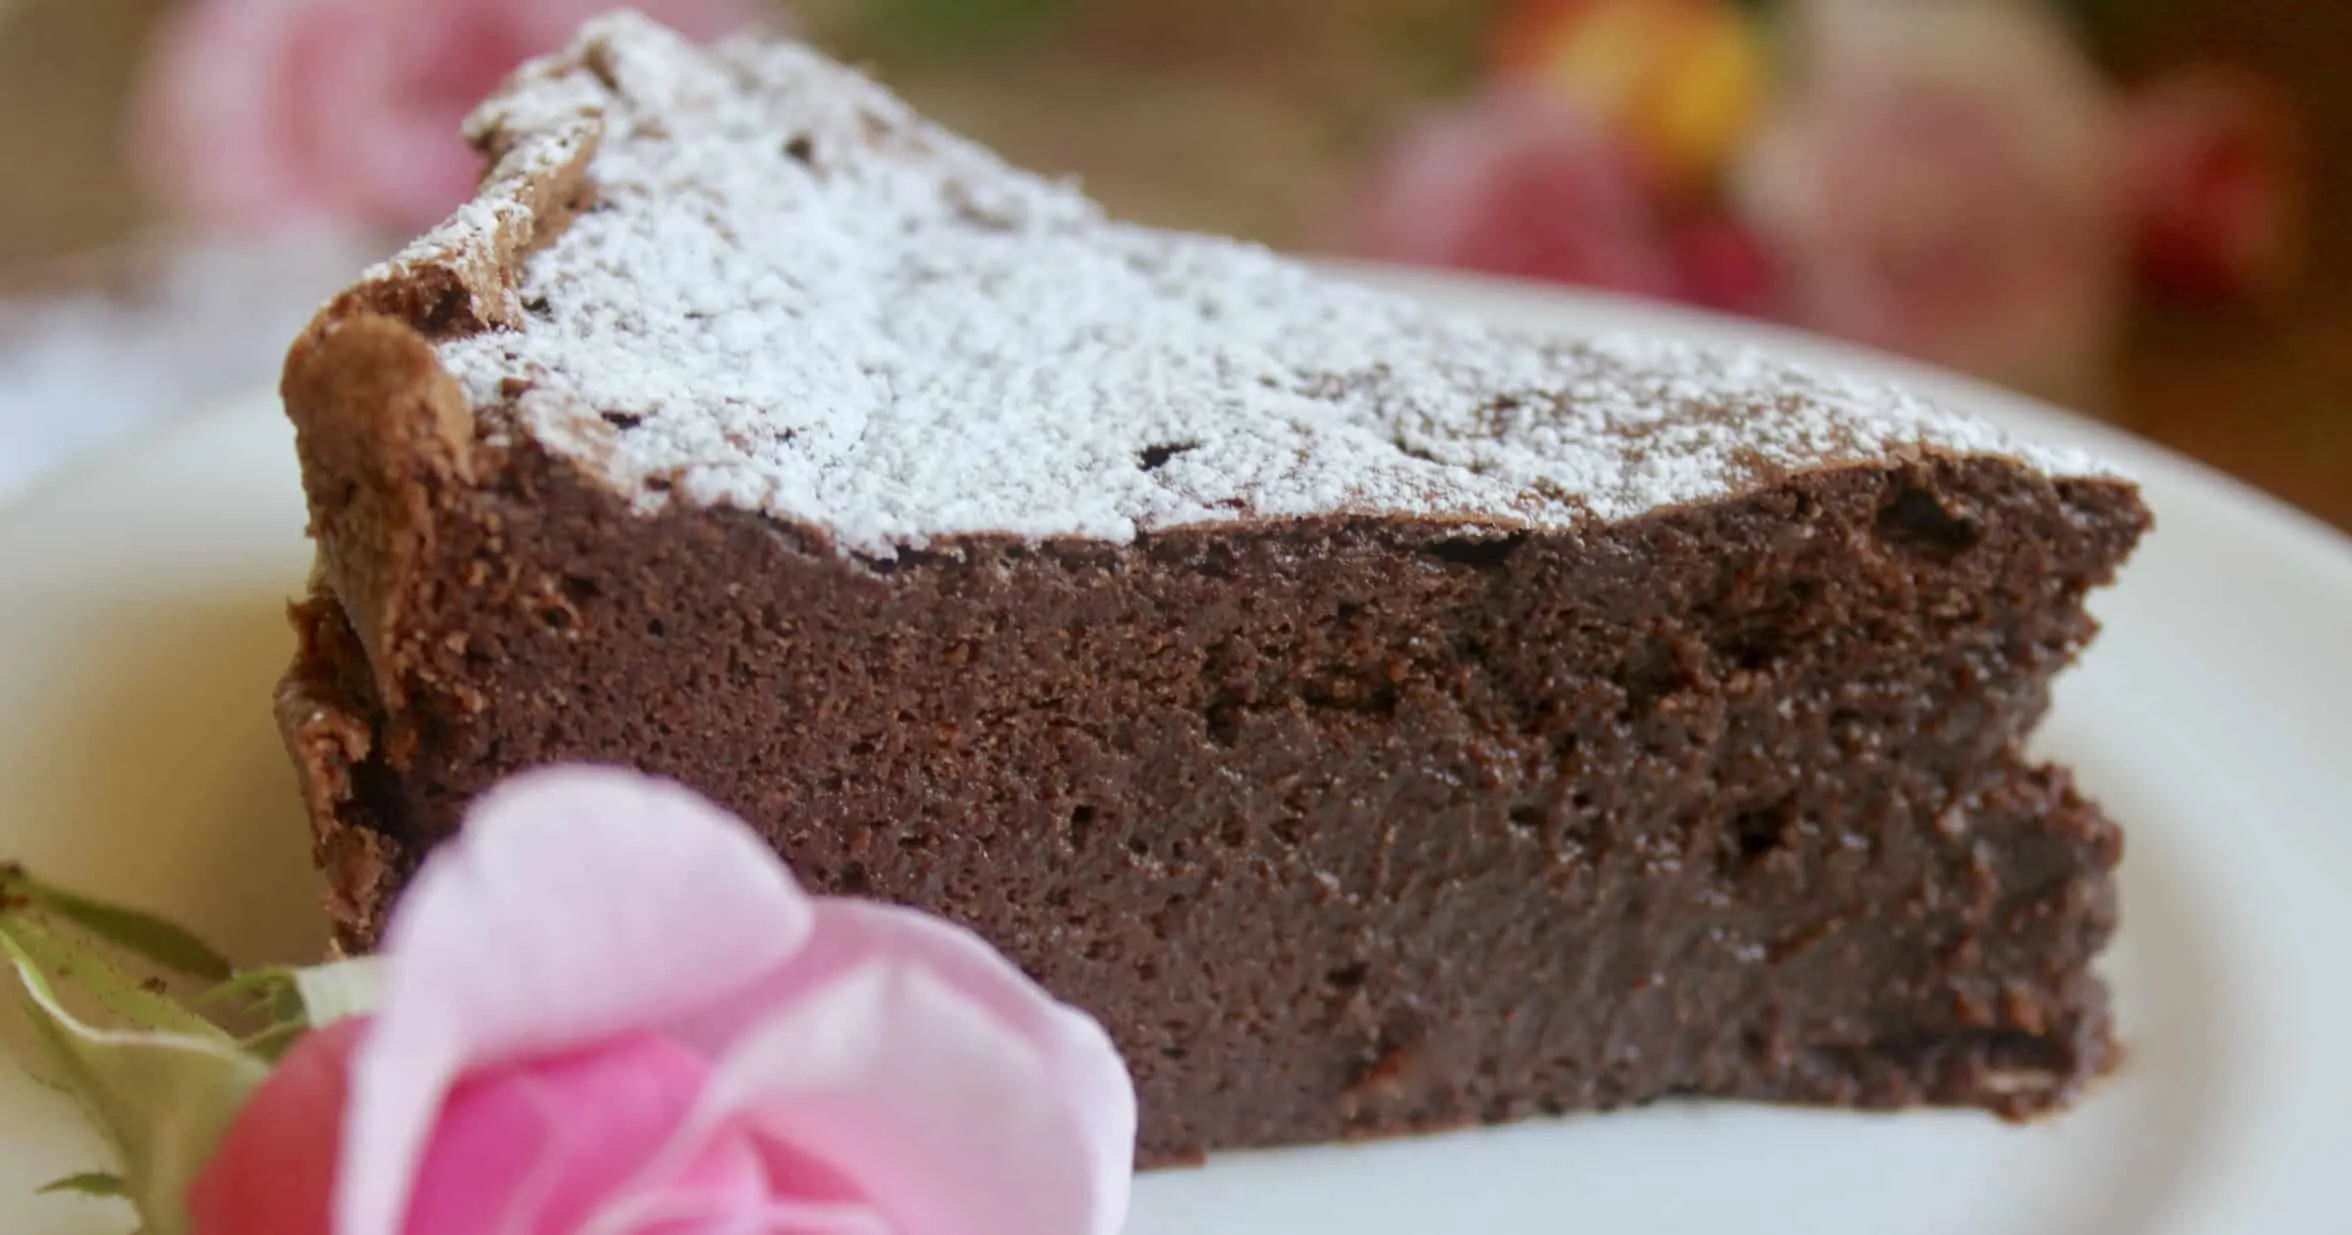 A slice of chocolate torte garnished with powdered sugar on a plate with a pink rose.